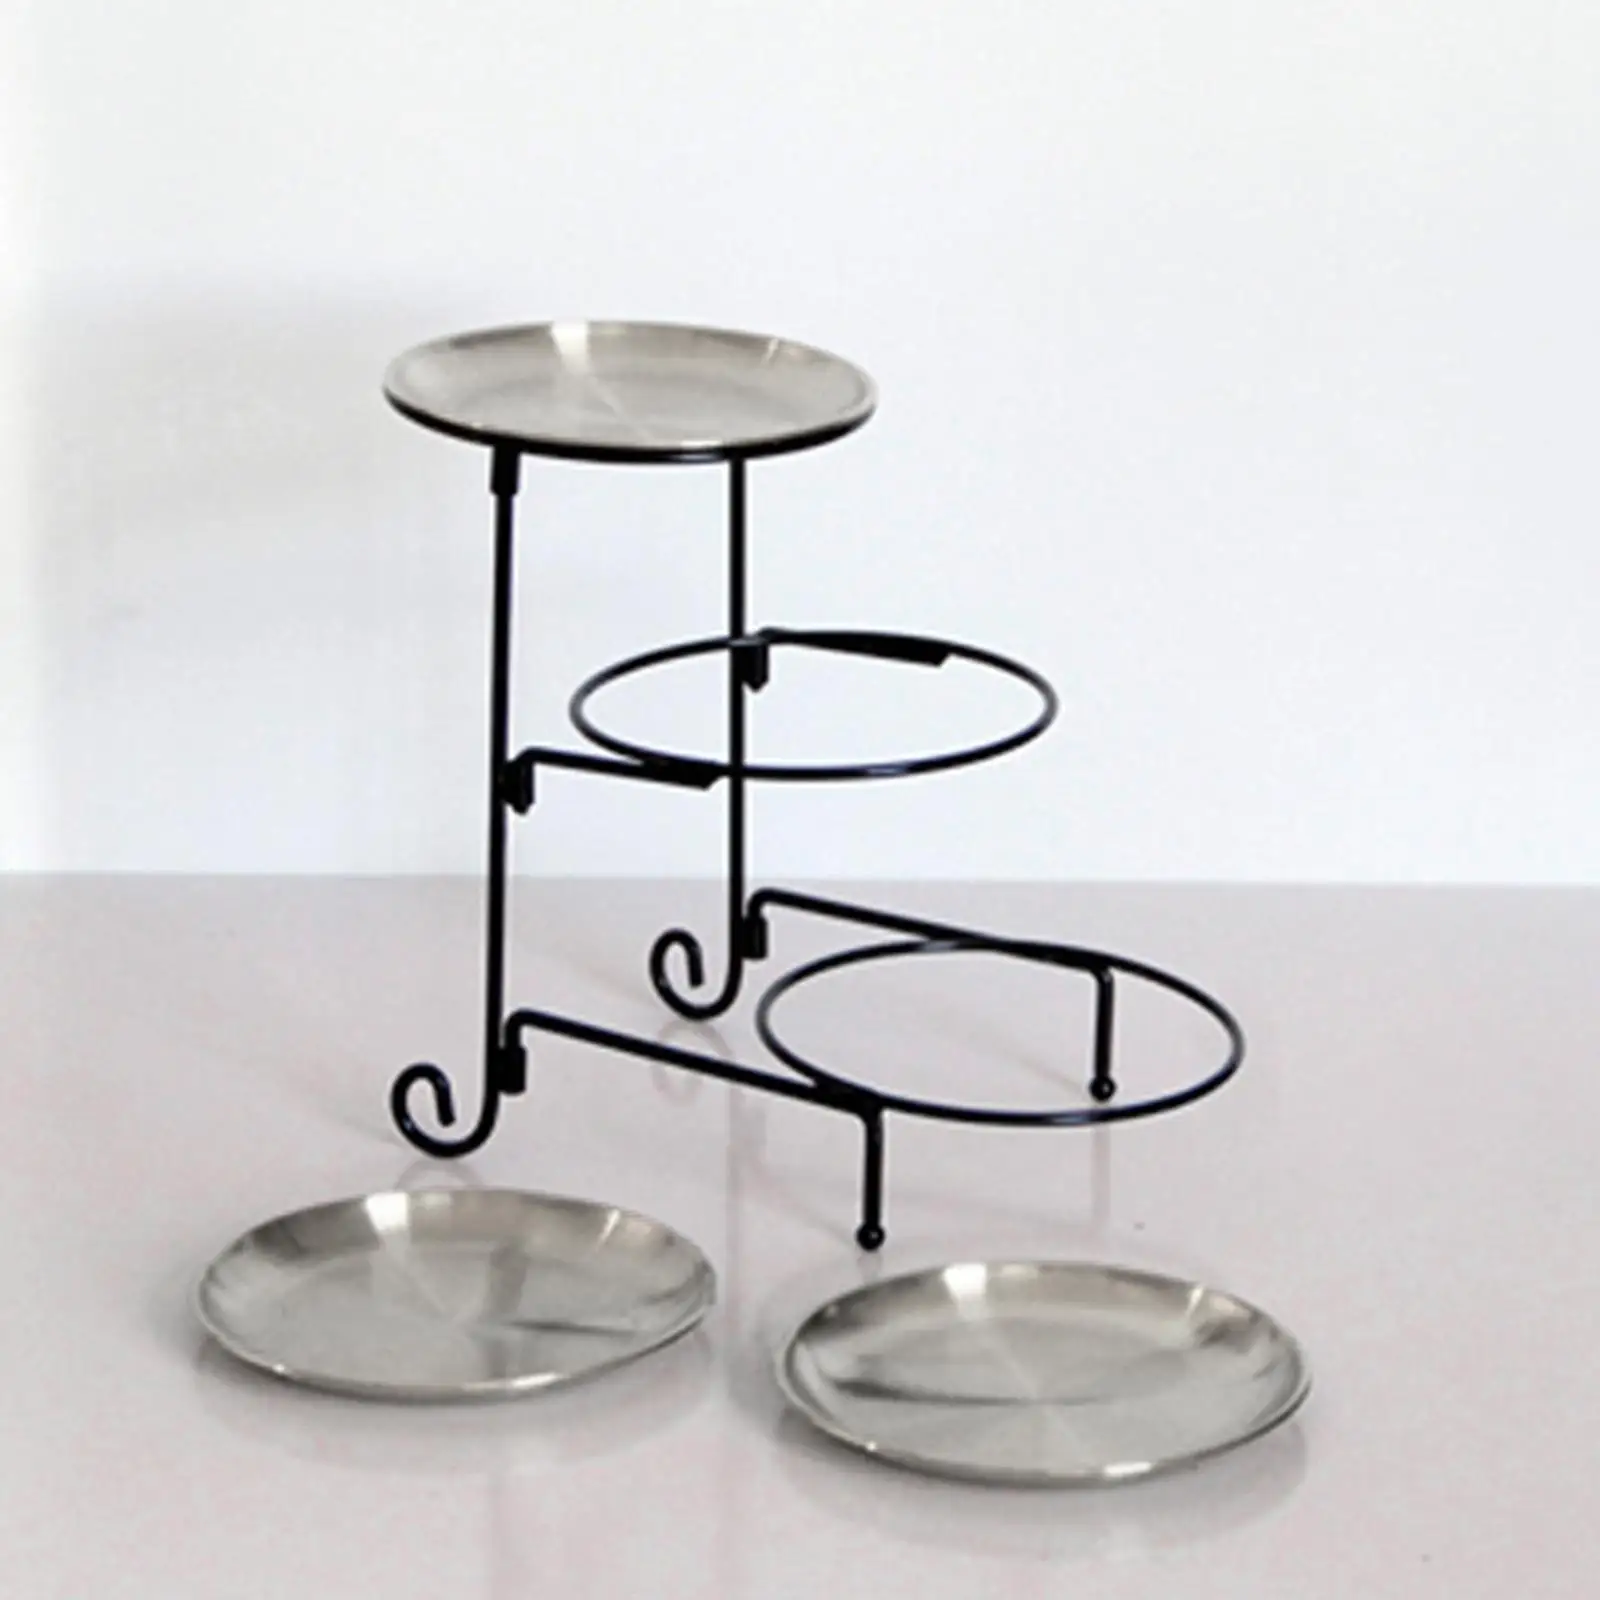 3 Tier Serving Tray Cupcake Stand with Stand Birthday Holiday Decor